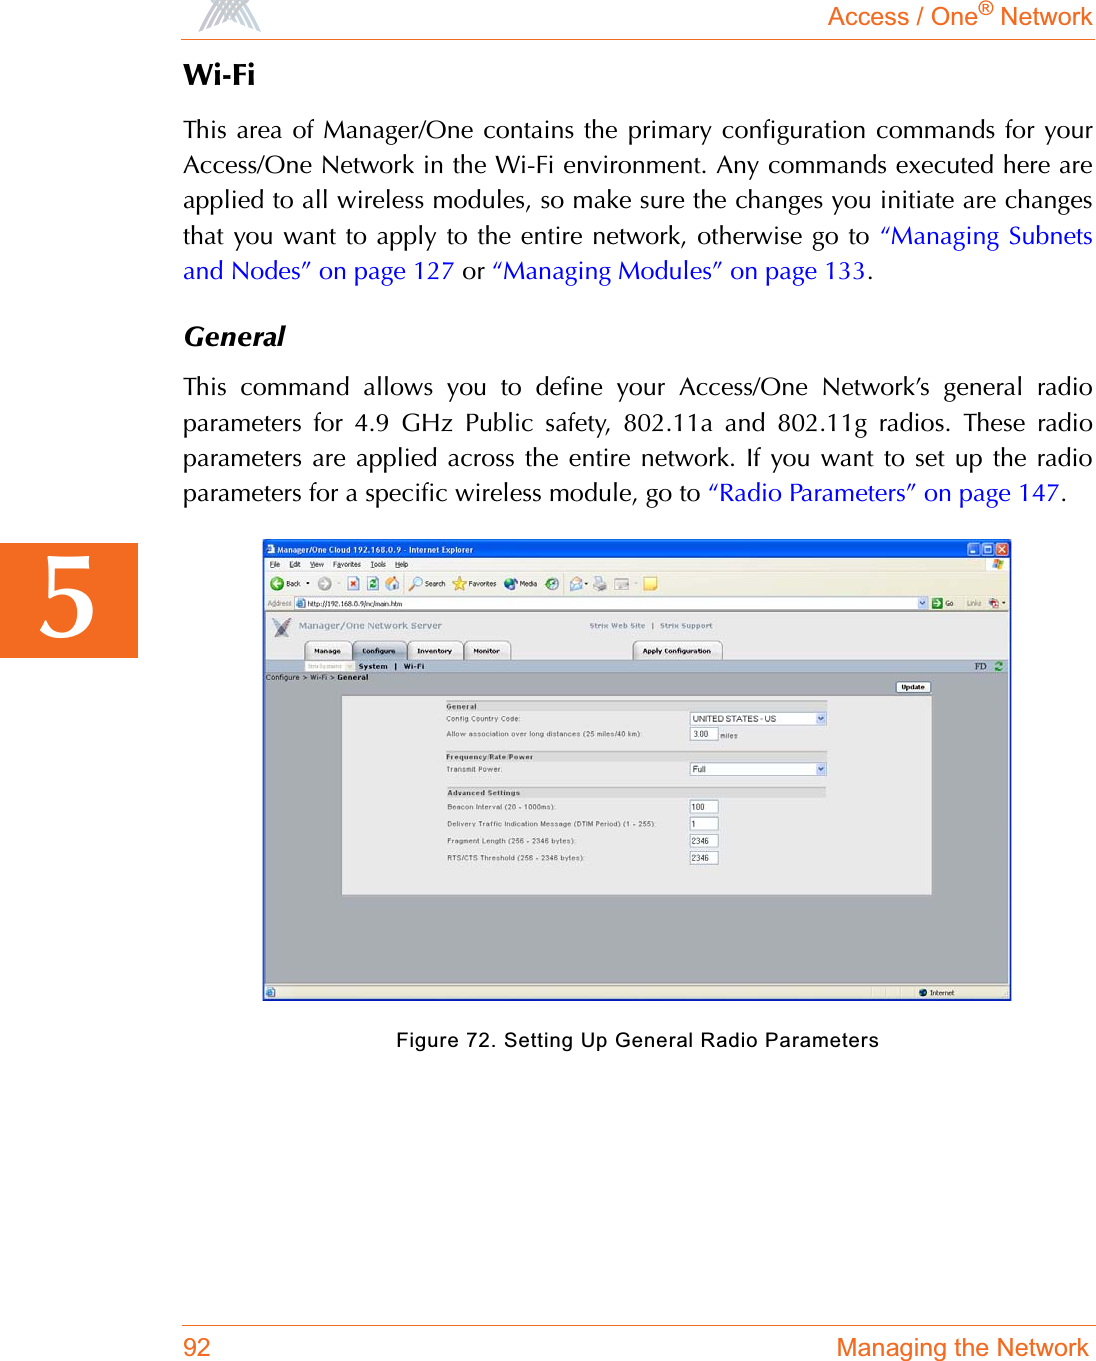 Access / One® Network92 Managing the Network5Wi-FiThis area of Manager/One contains the primary configuration commands for yourAccess/One Network in the Wi-Fi environment. Any commands executed here areapplied to all wireless modules, so make sure the changes you initiate are changesthat you want to apply to the entire network, otherwise go to “Managing Subnetsand Nodes” on page 127 or “Managing Modules” on page 133.GeneralThis command allows you to define your Access/One Network’s general radioparameters for 4.9 GHz Public safety, 802.11a and 802.11g radios. These radioparameters are applied across the entire network. If you want to set up the radioparameters for a specific wireless module, go to “Radio Parameters” on page 147.Figure 72. Setting Up General Radio Parameters